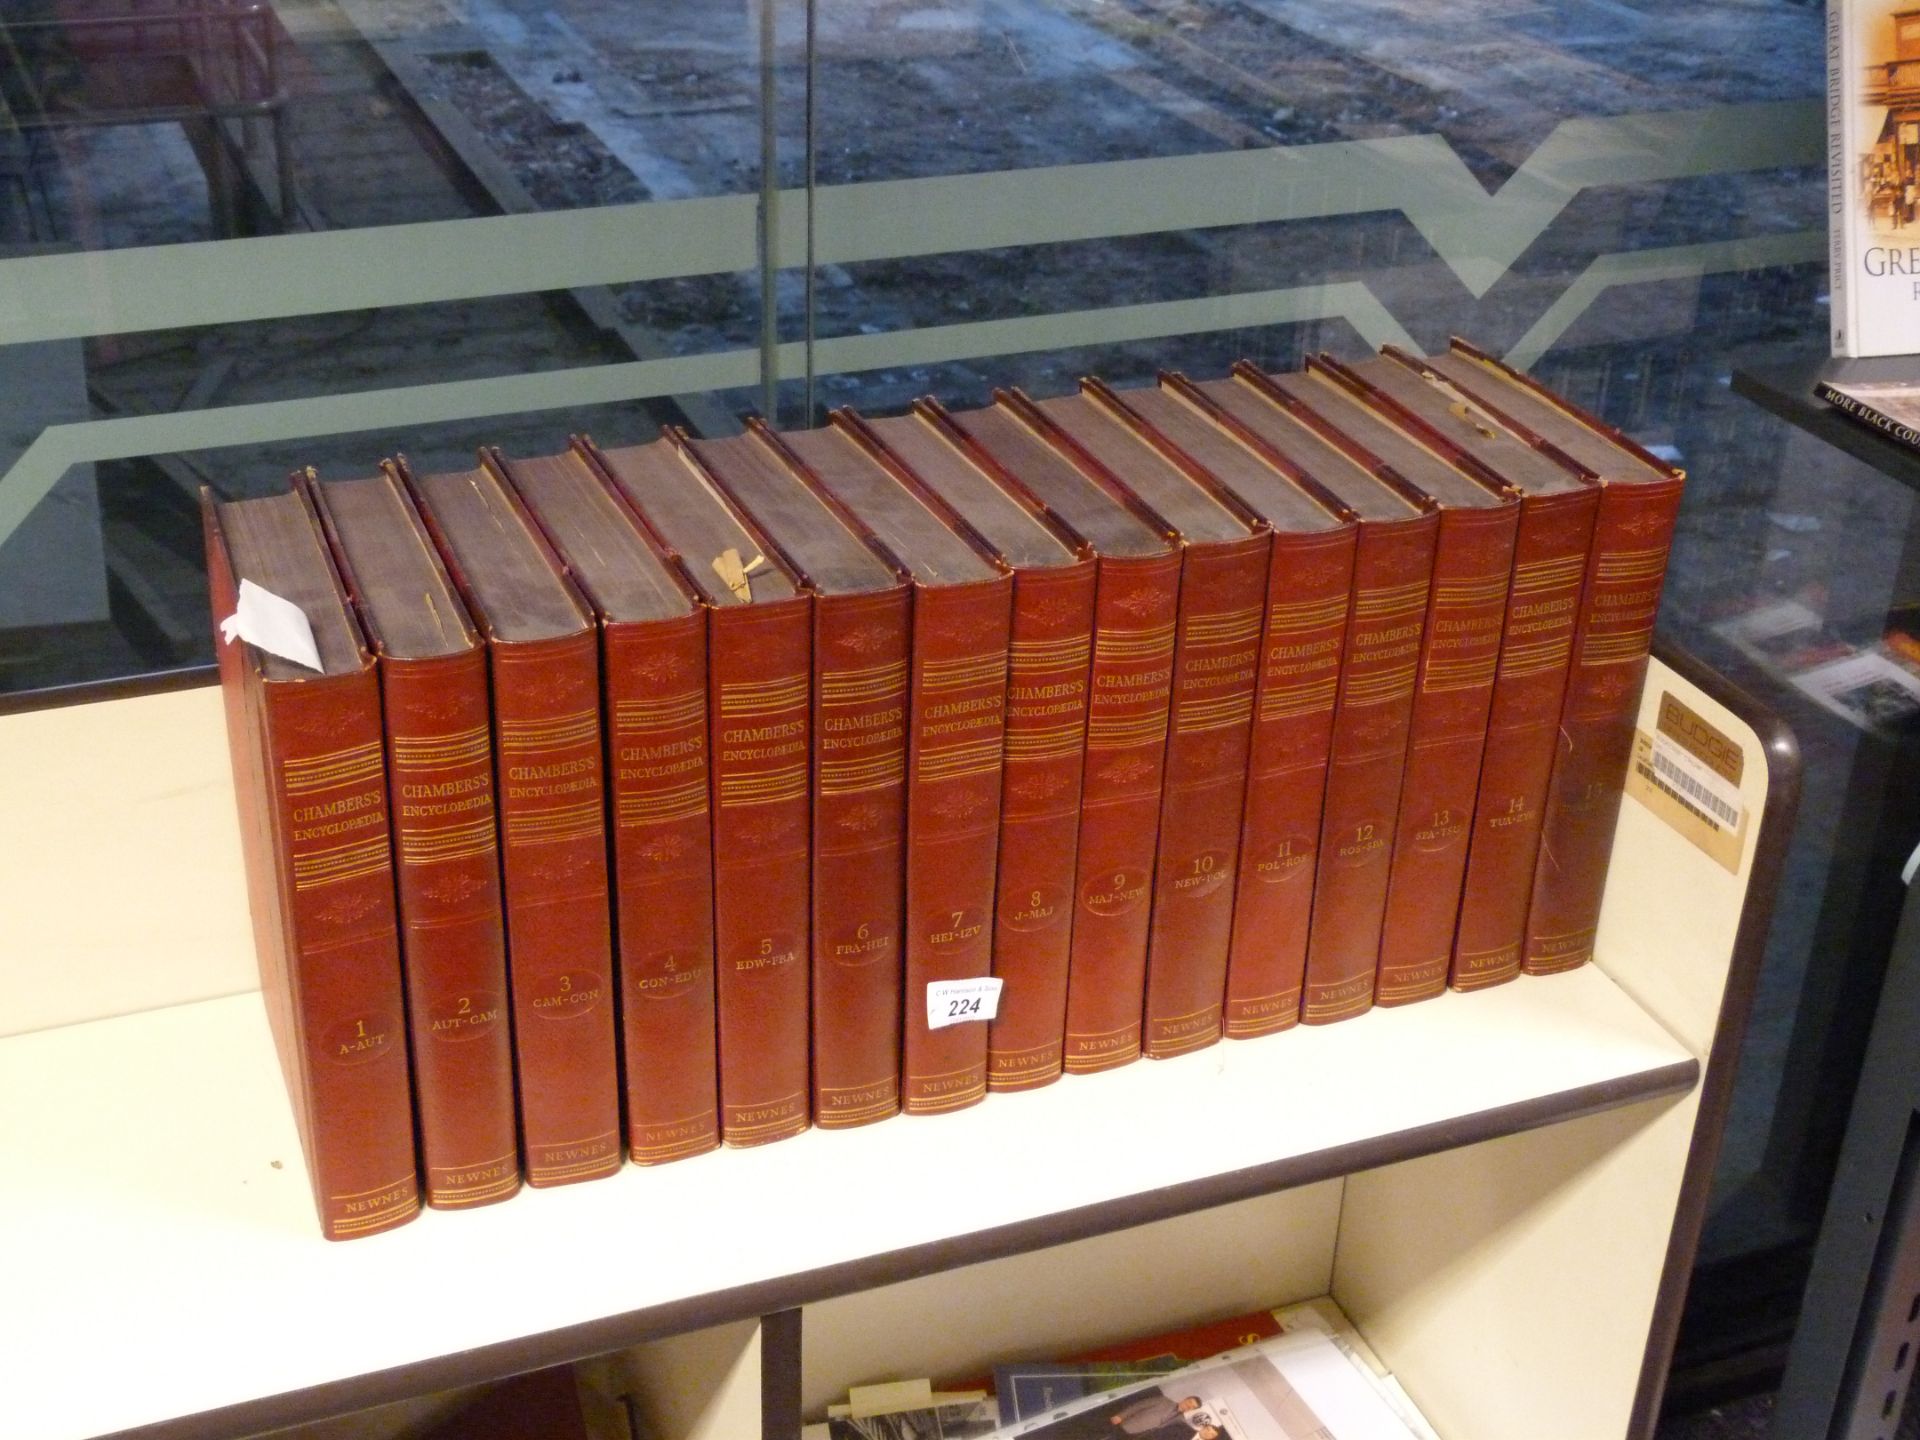 Volumes 1-15 of Chambers Encyclopedias published in 1955.